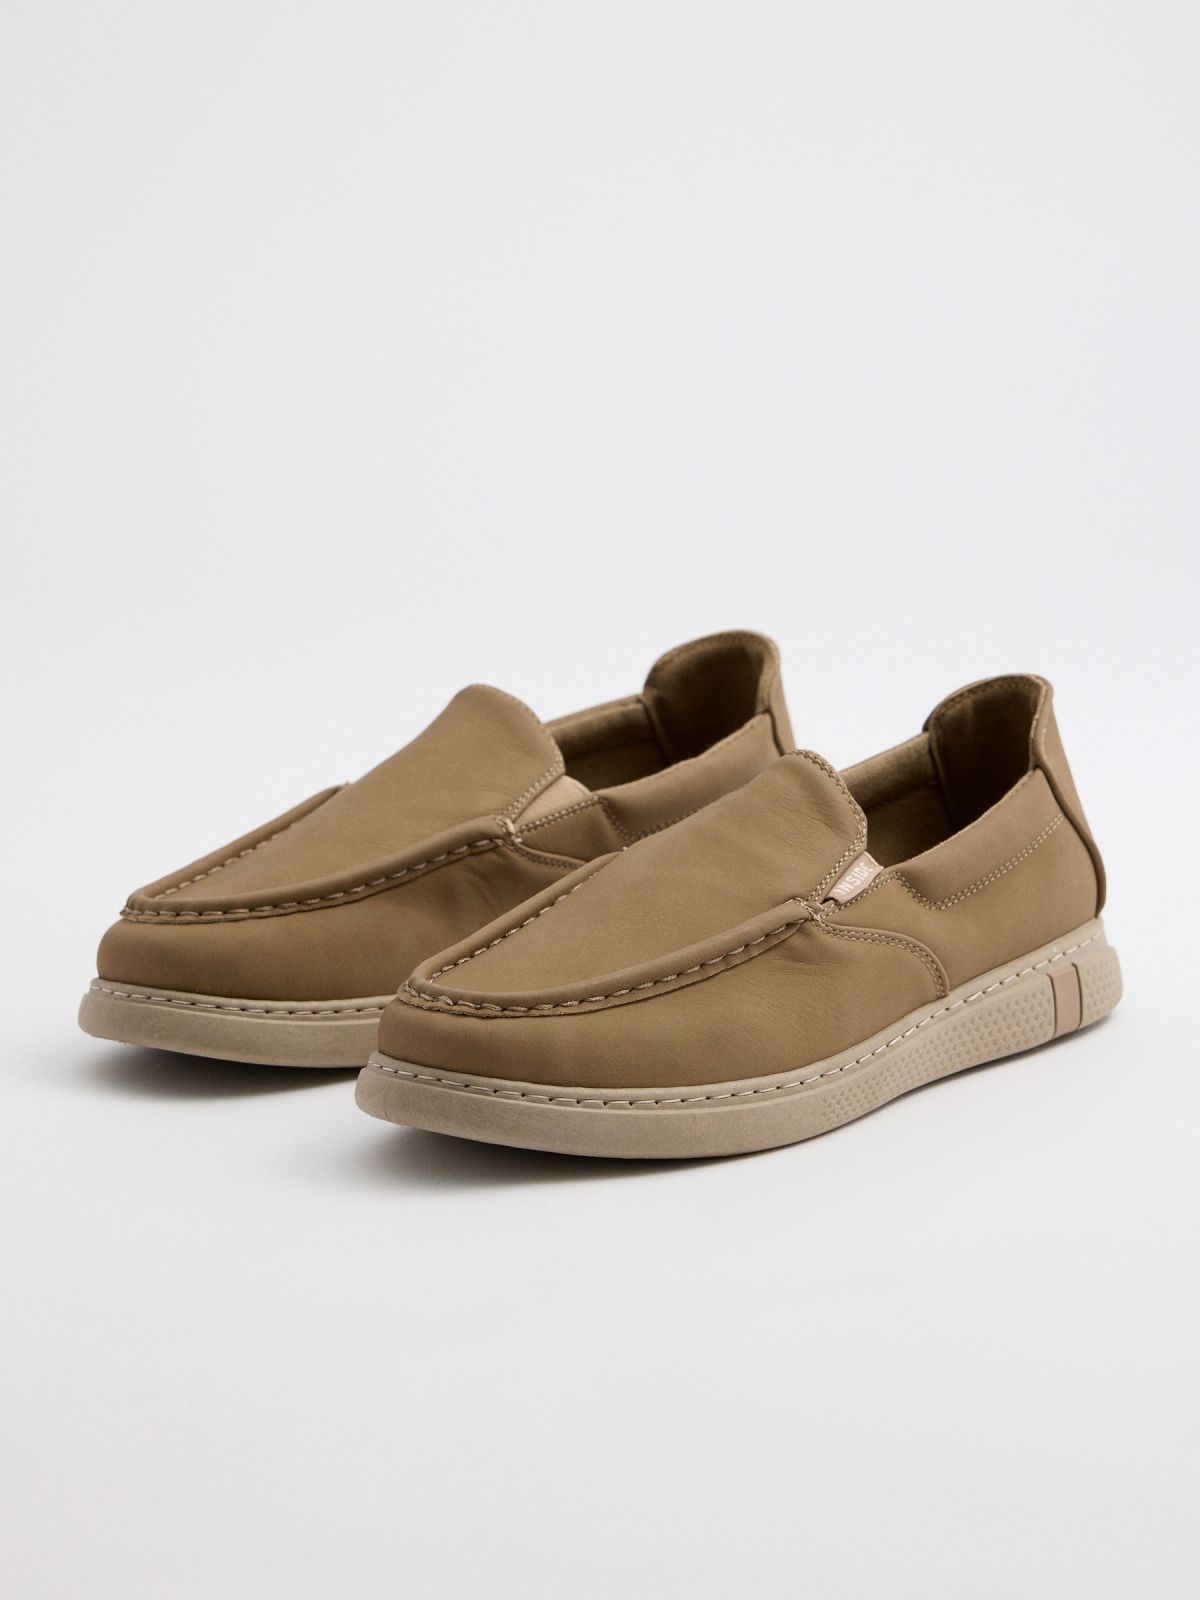 Camel moccasins brown 45º front view